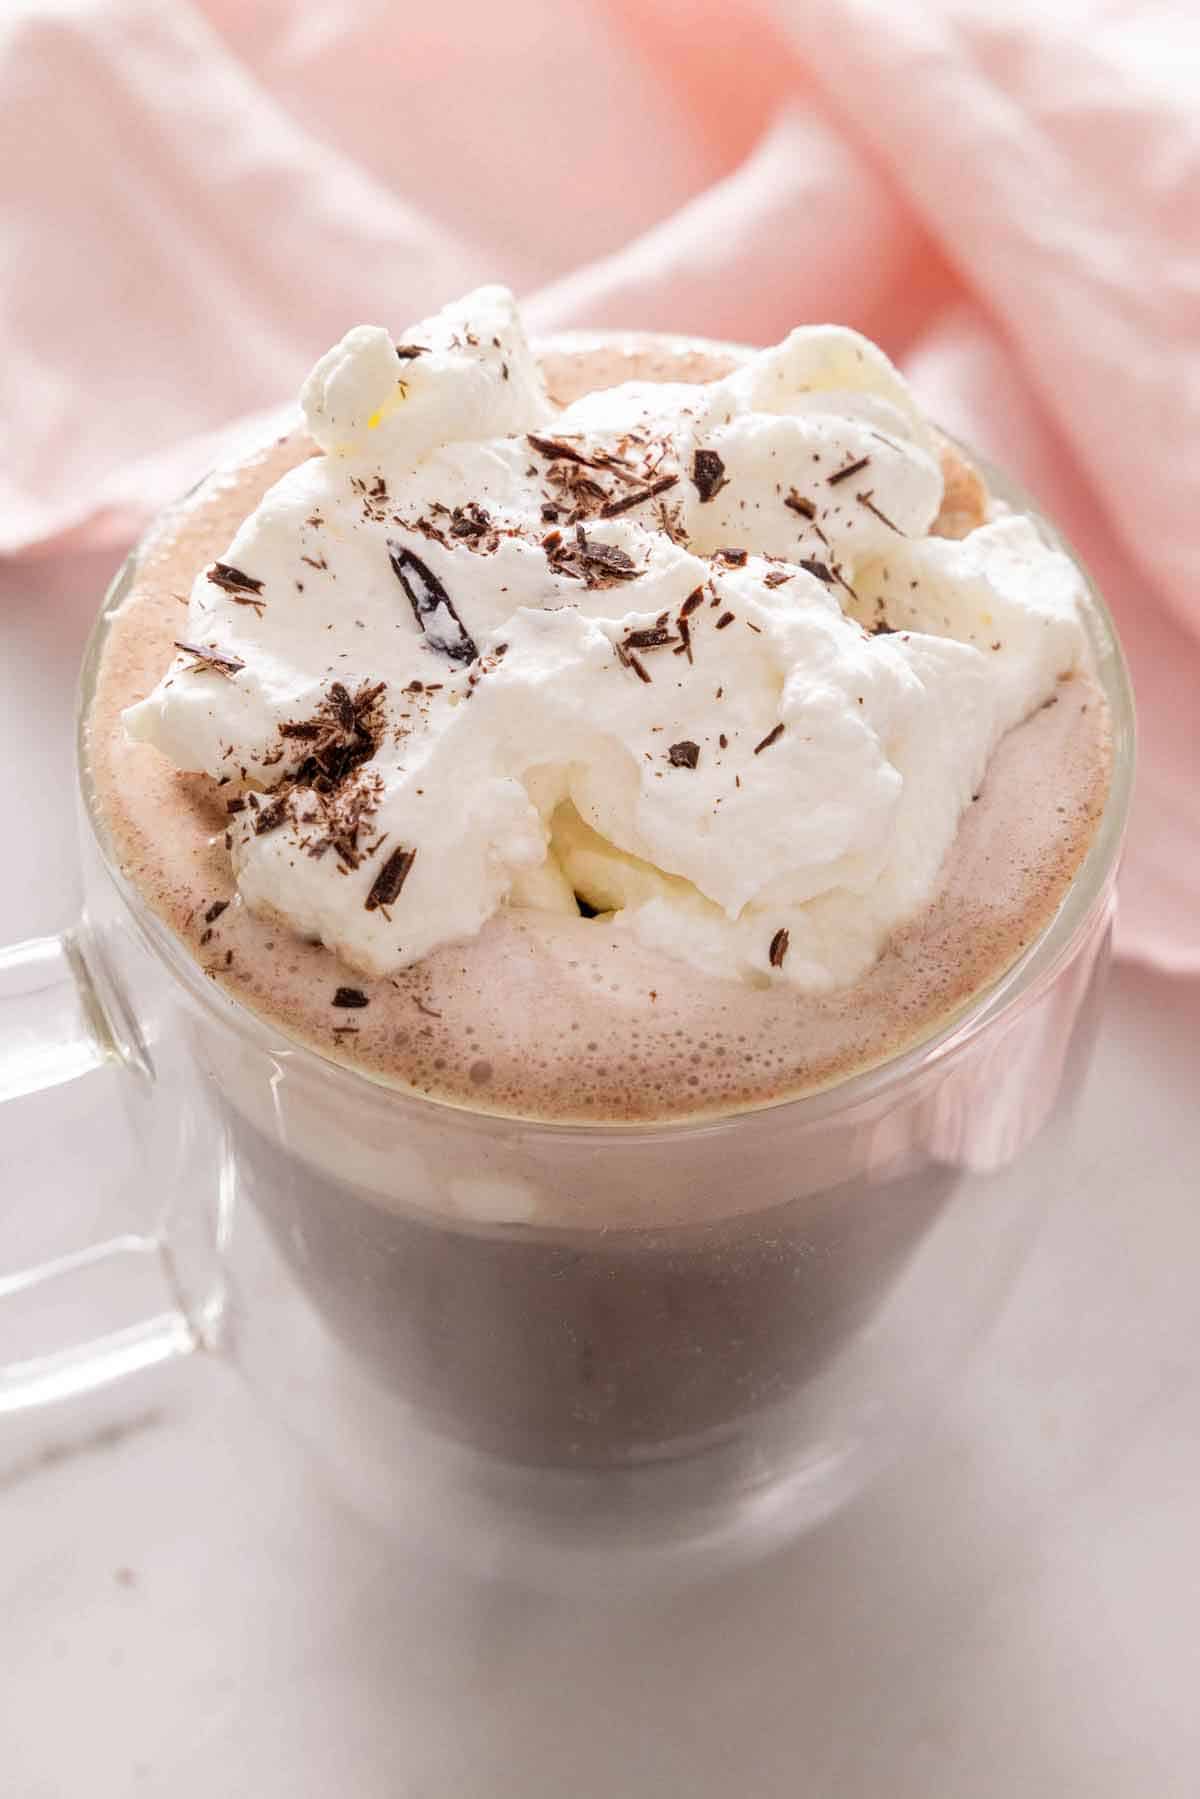 A cup of hot chocolate with whipped cream and shaved chocolate on top.